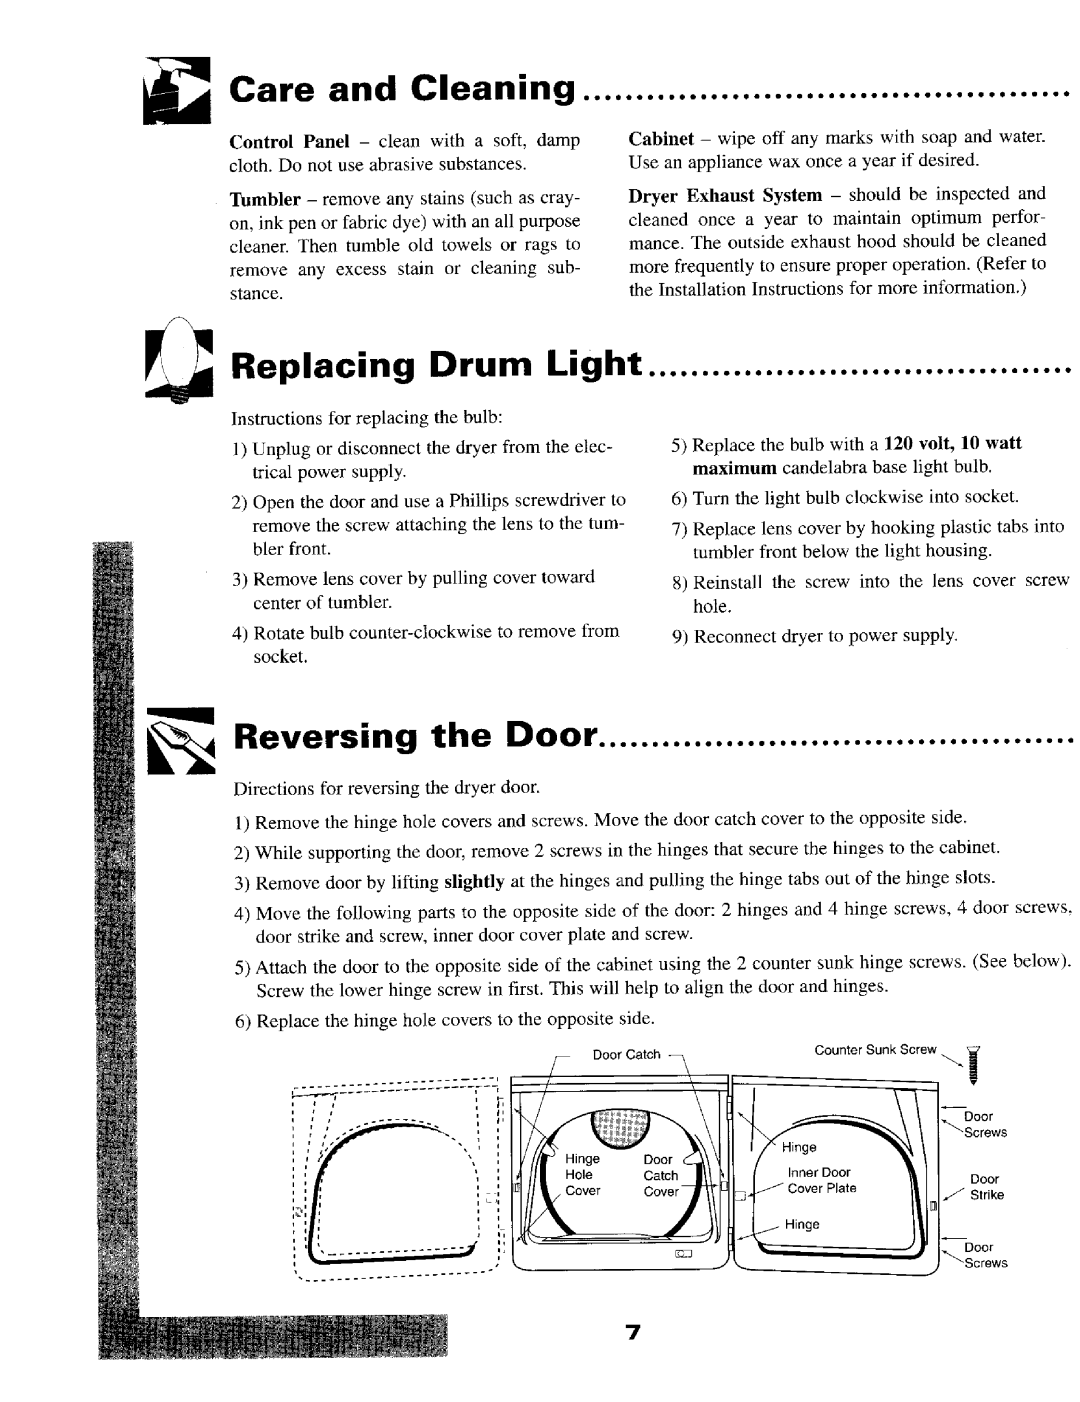 Maytag MD9706, MD9606 warranty Care and Cleaning, Replacing Drum Light, Reversing the Door 